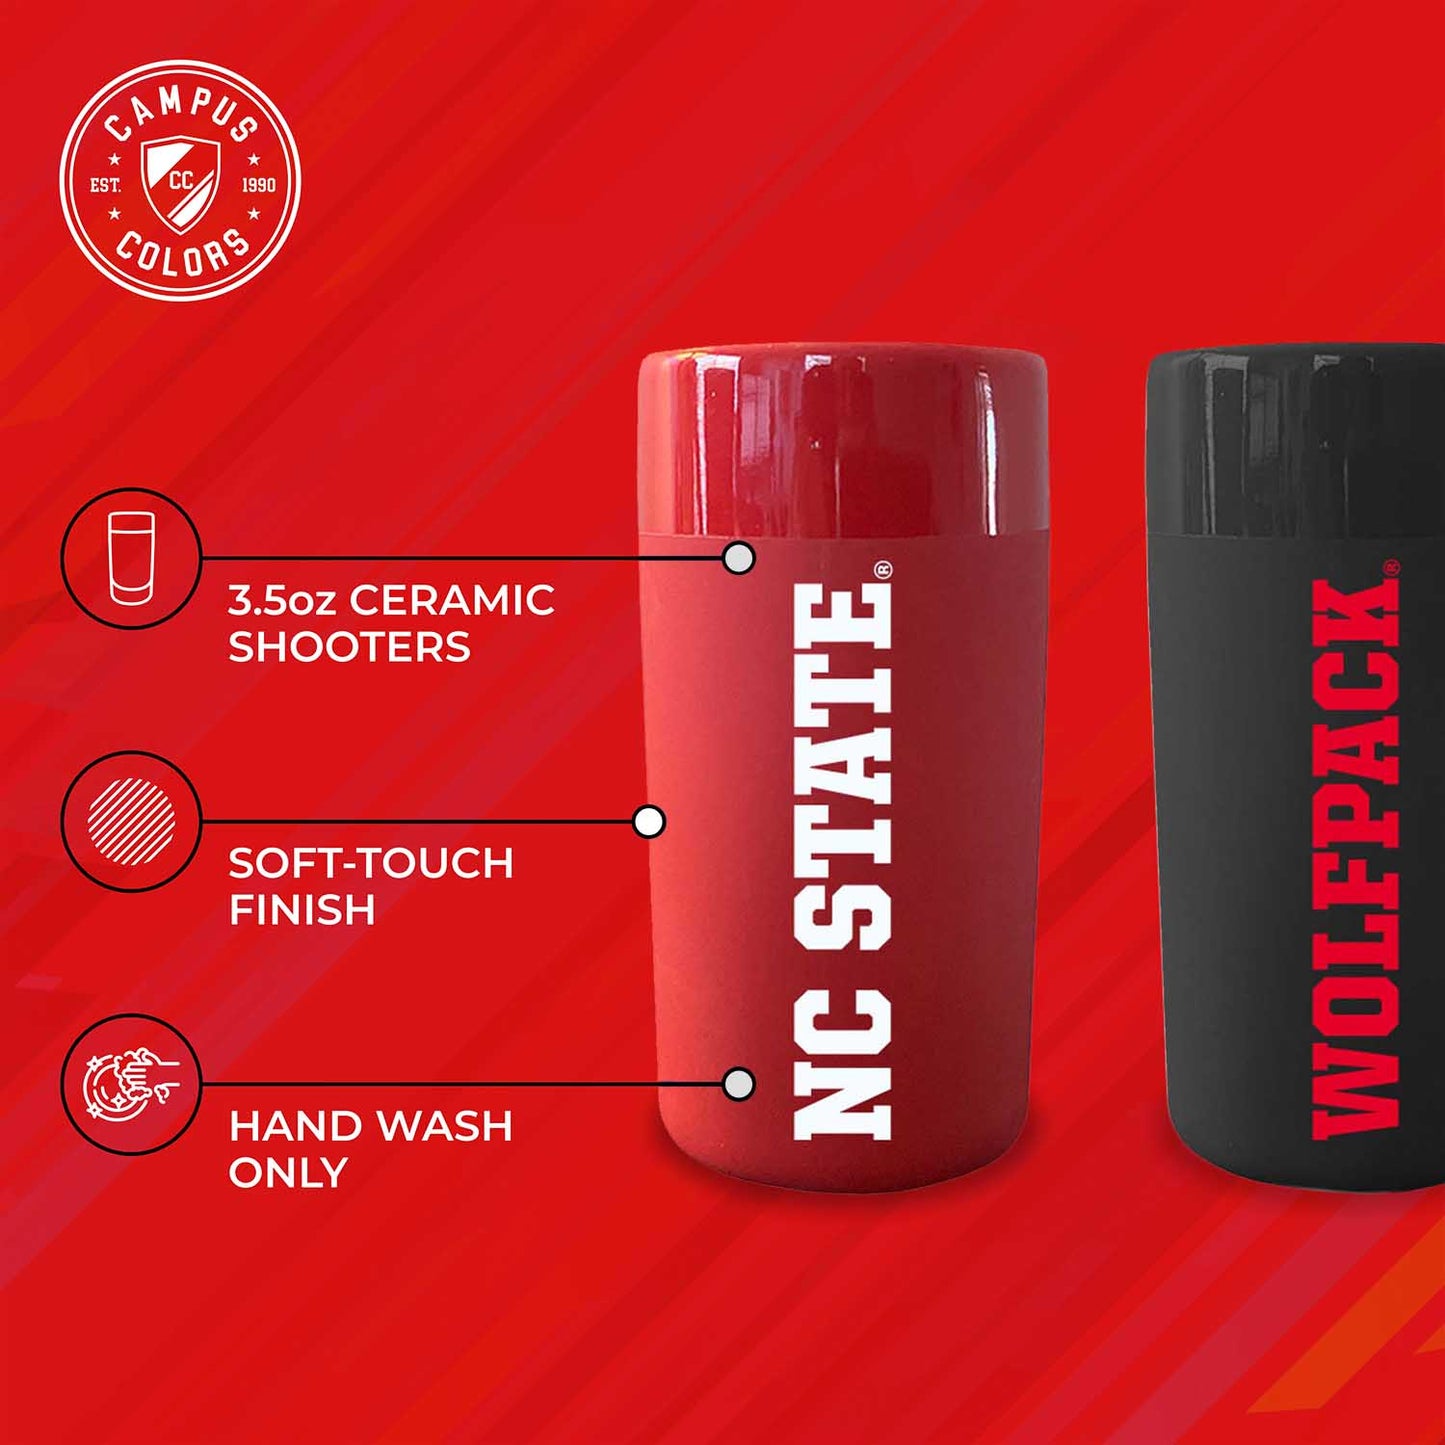 NC State Wolfpack College and University 2-Pack Shot Glasses - Team Color